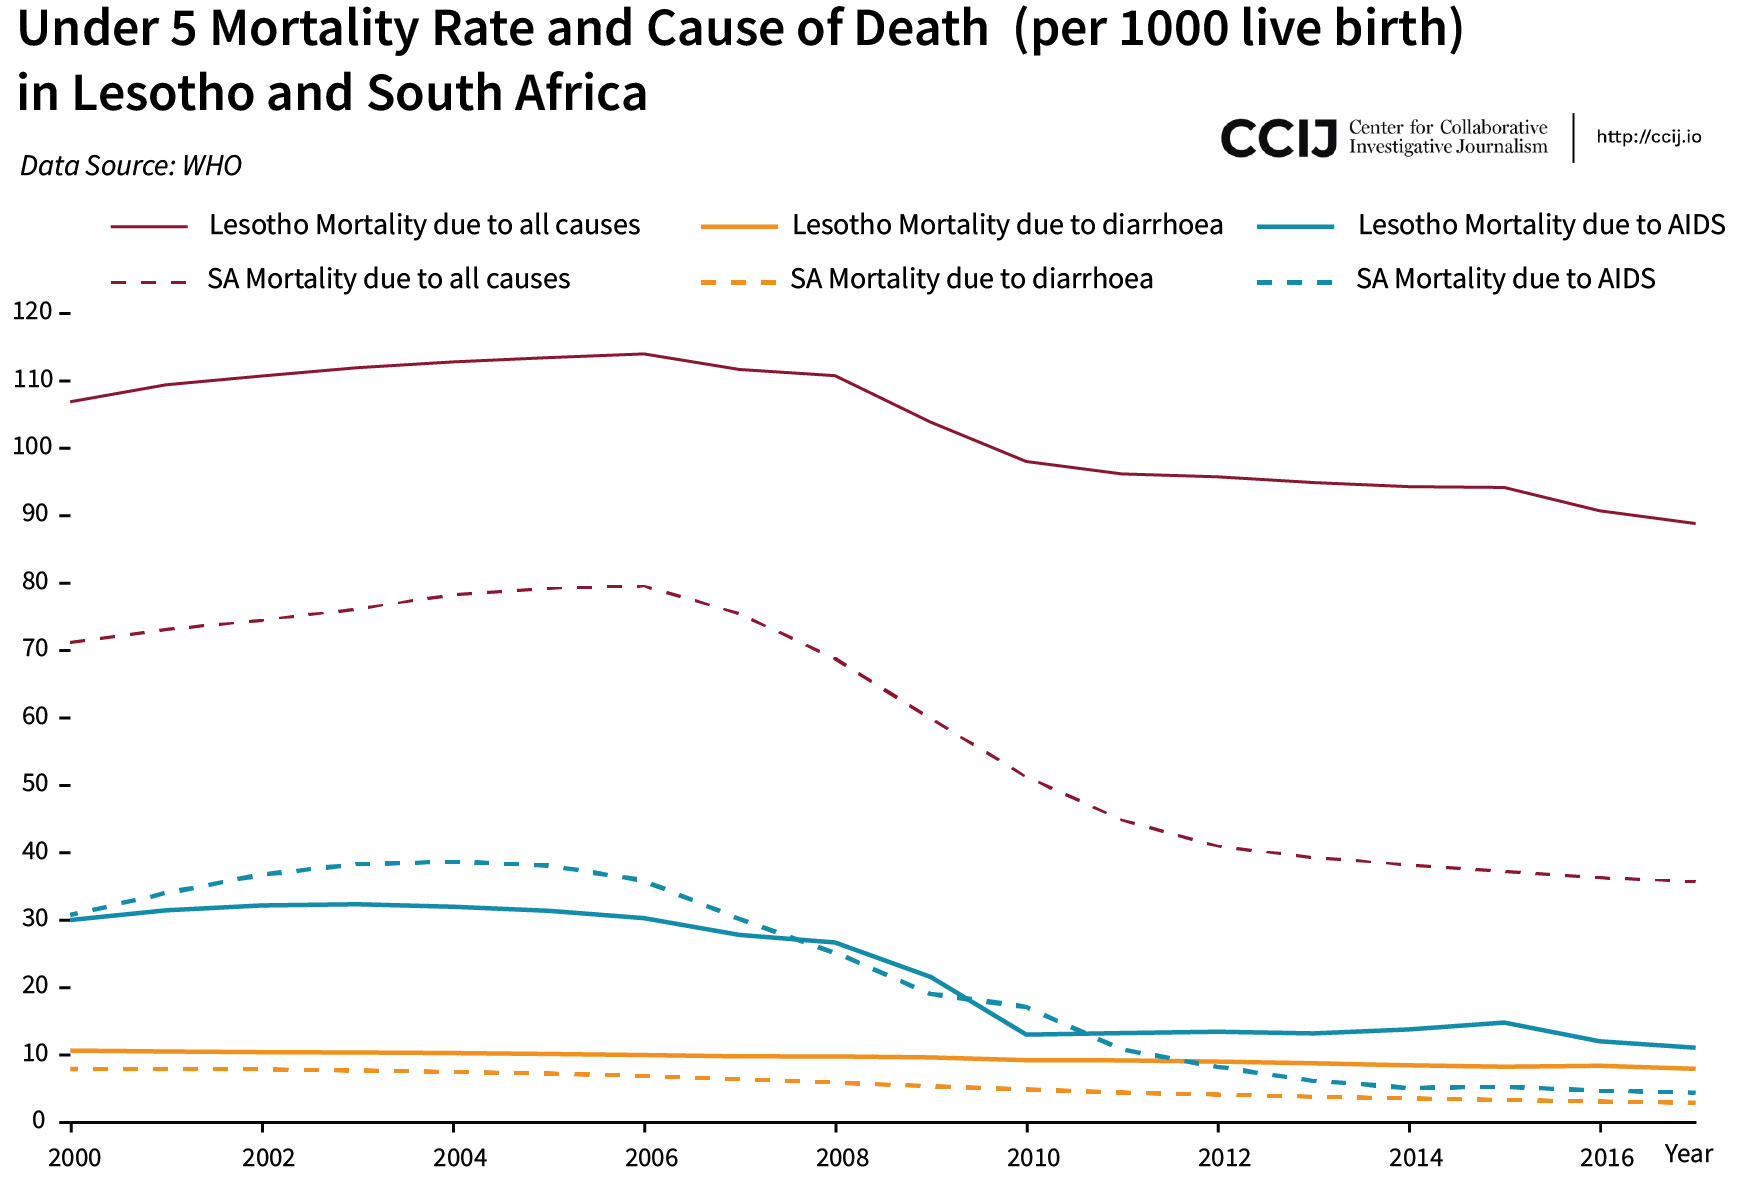 A line graph chart comparing the under 5 mortality rate and causes of death in Lesotho and South Africa